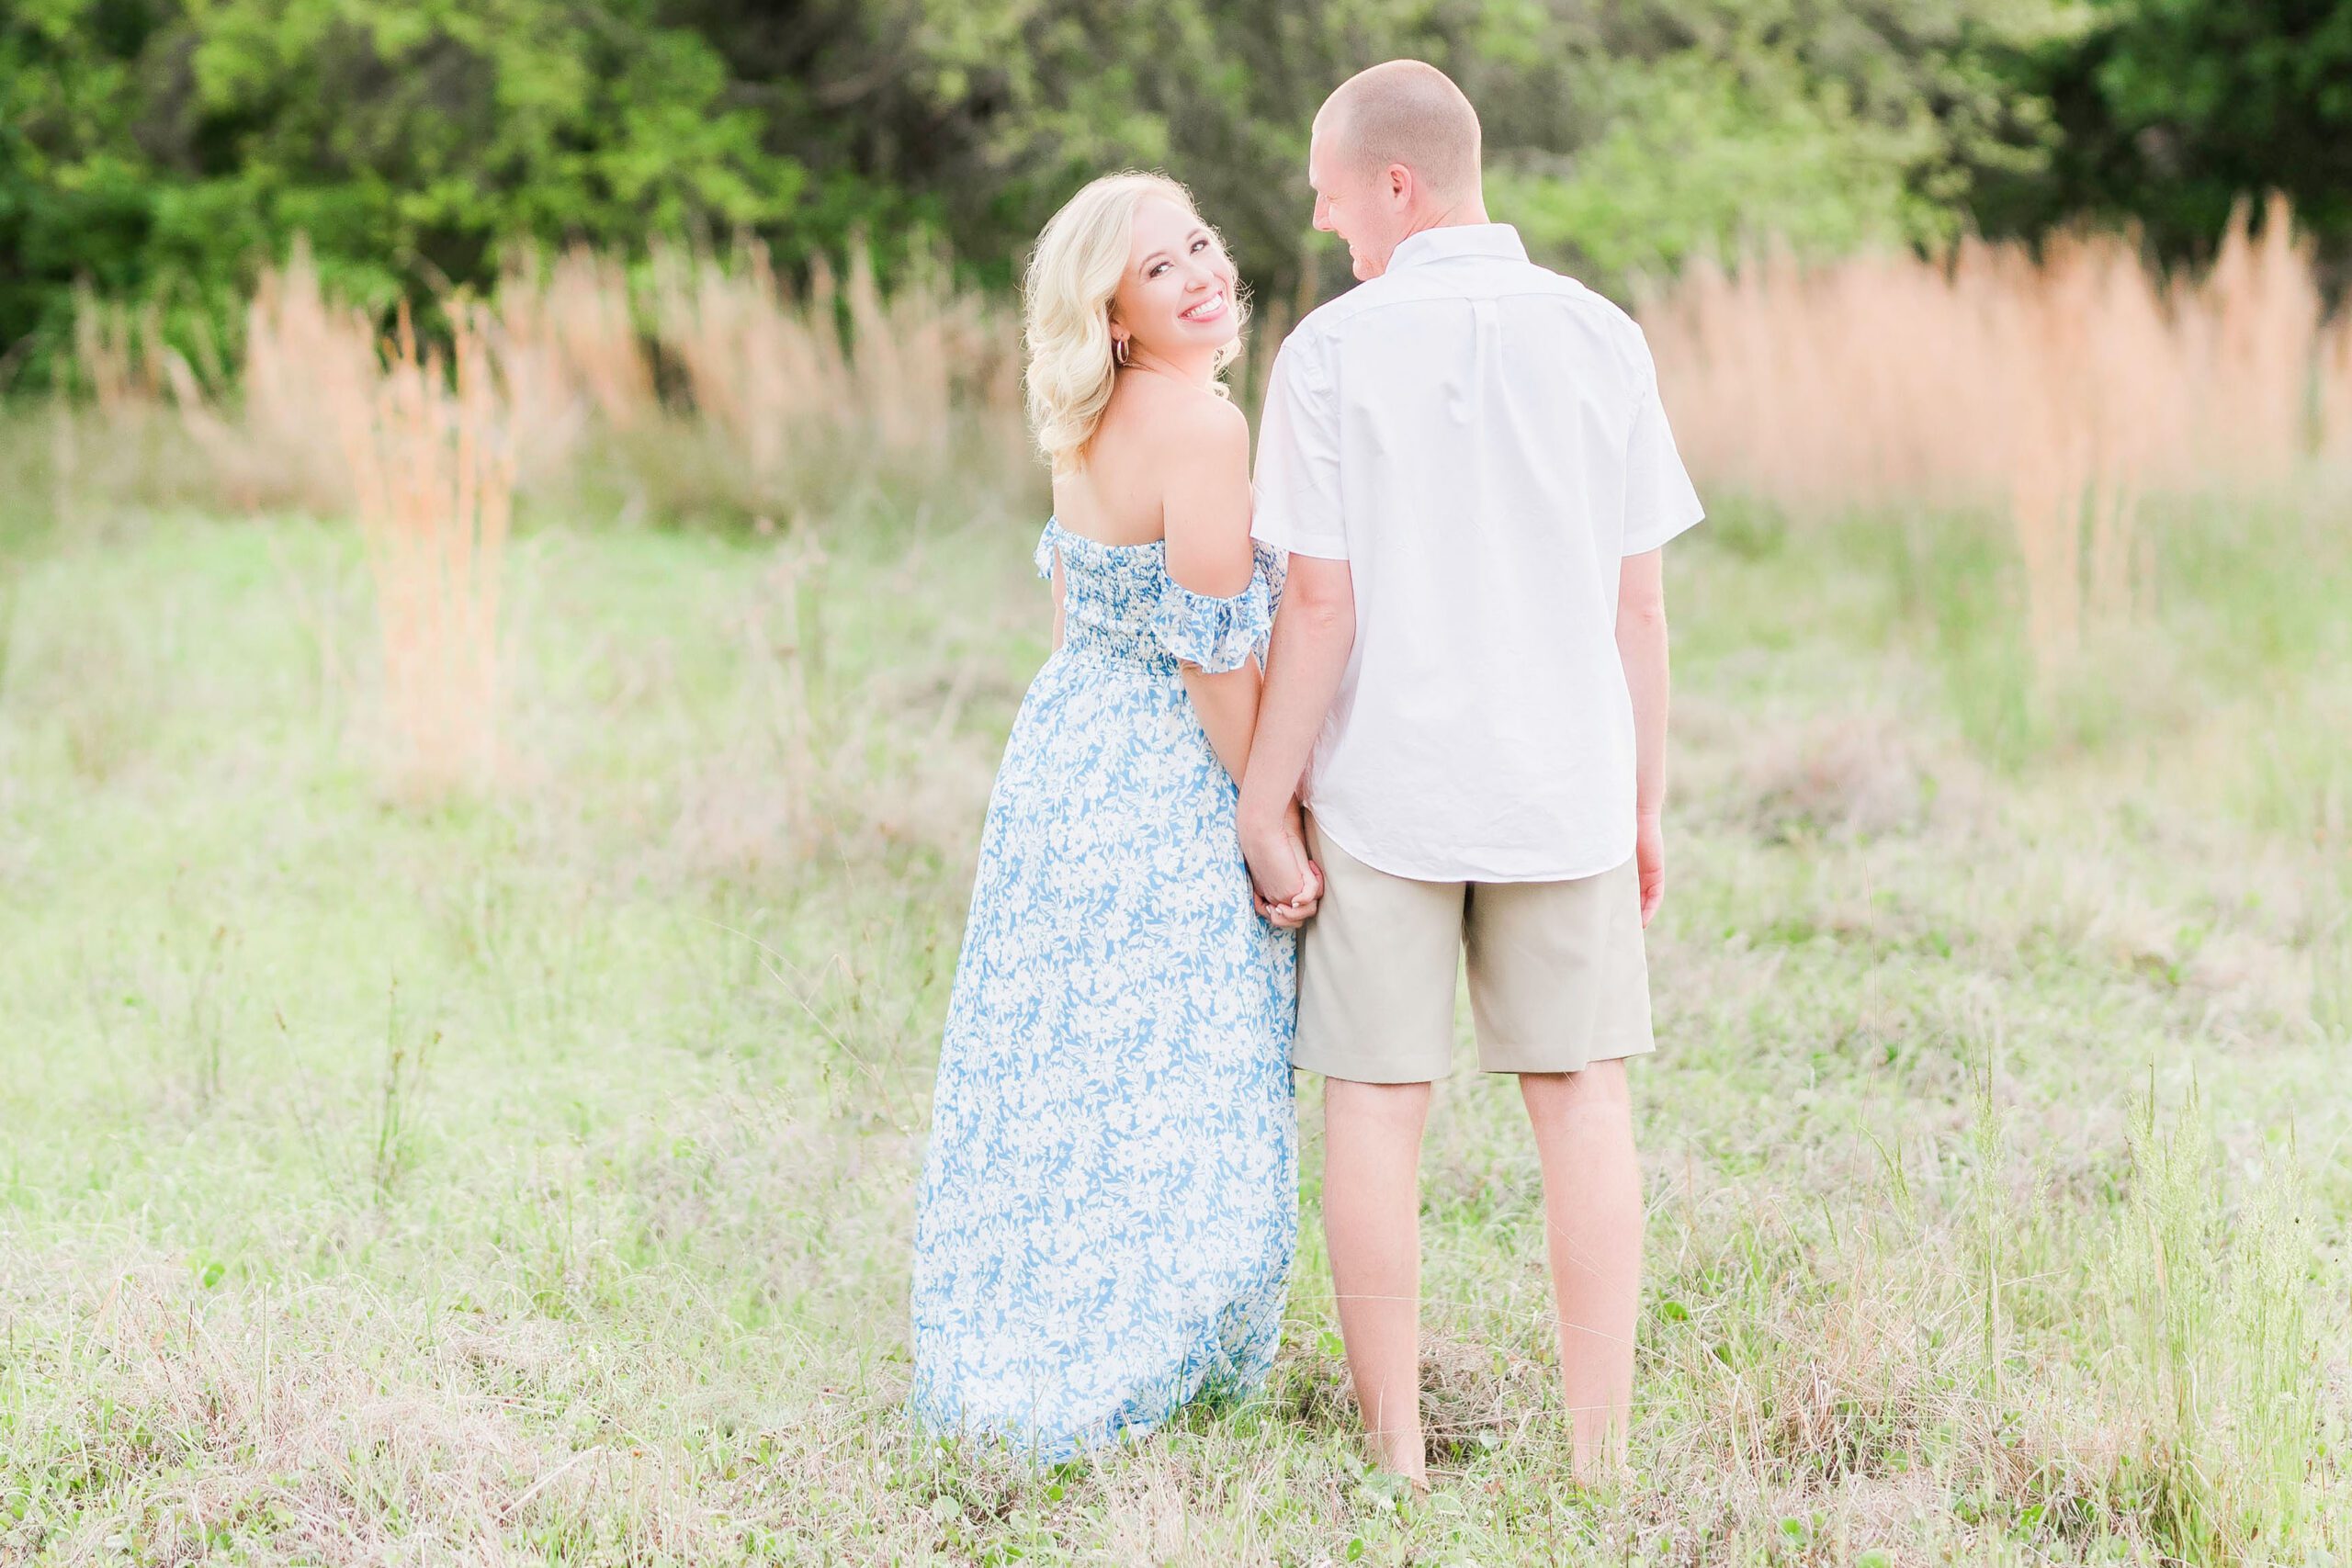 Engagement Photos in the Grass